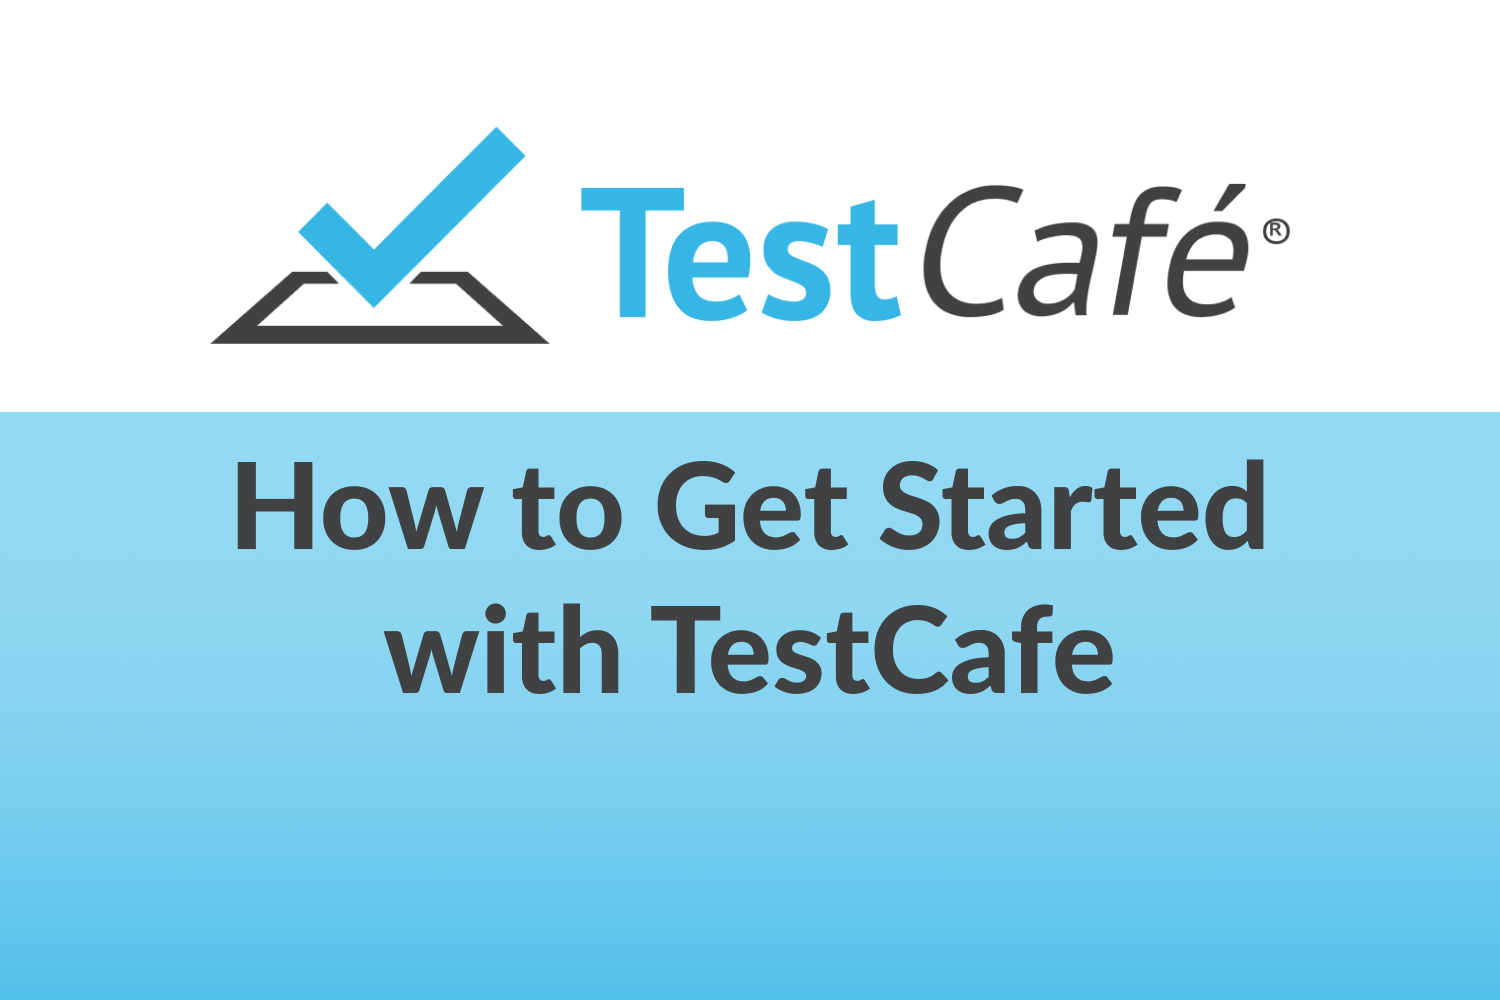 How to Get Started with TestCafe